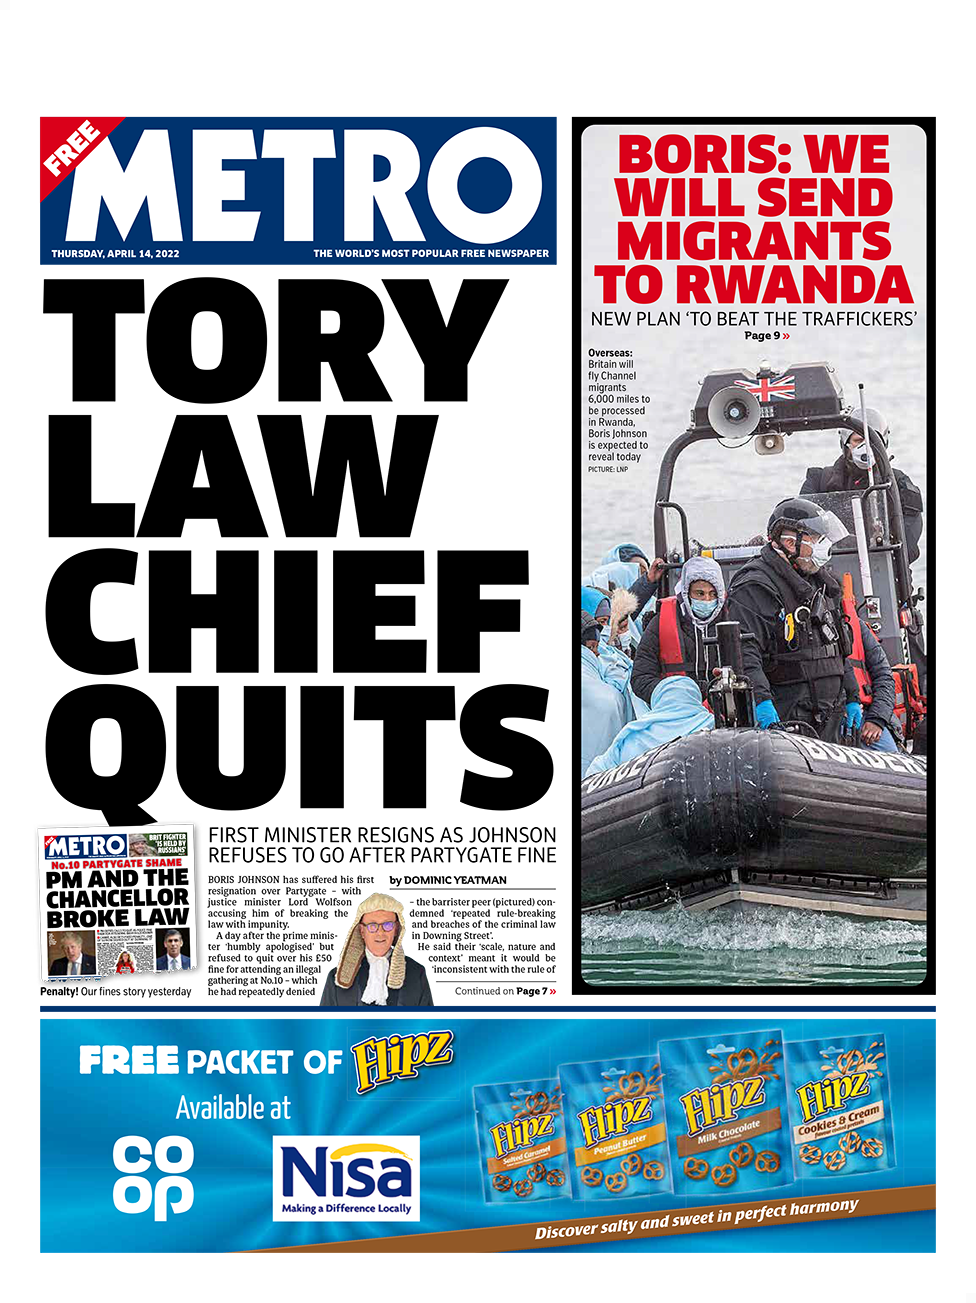 Following the resignation of justice minister Lord Wolfson over the Partygate scandal, the headline in the Metro reads: "Tory law chief quits"